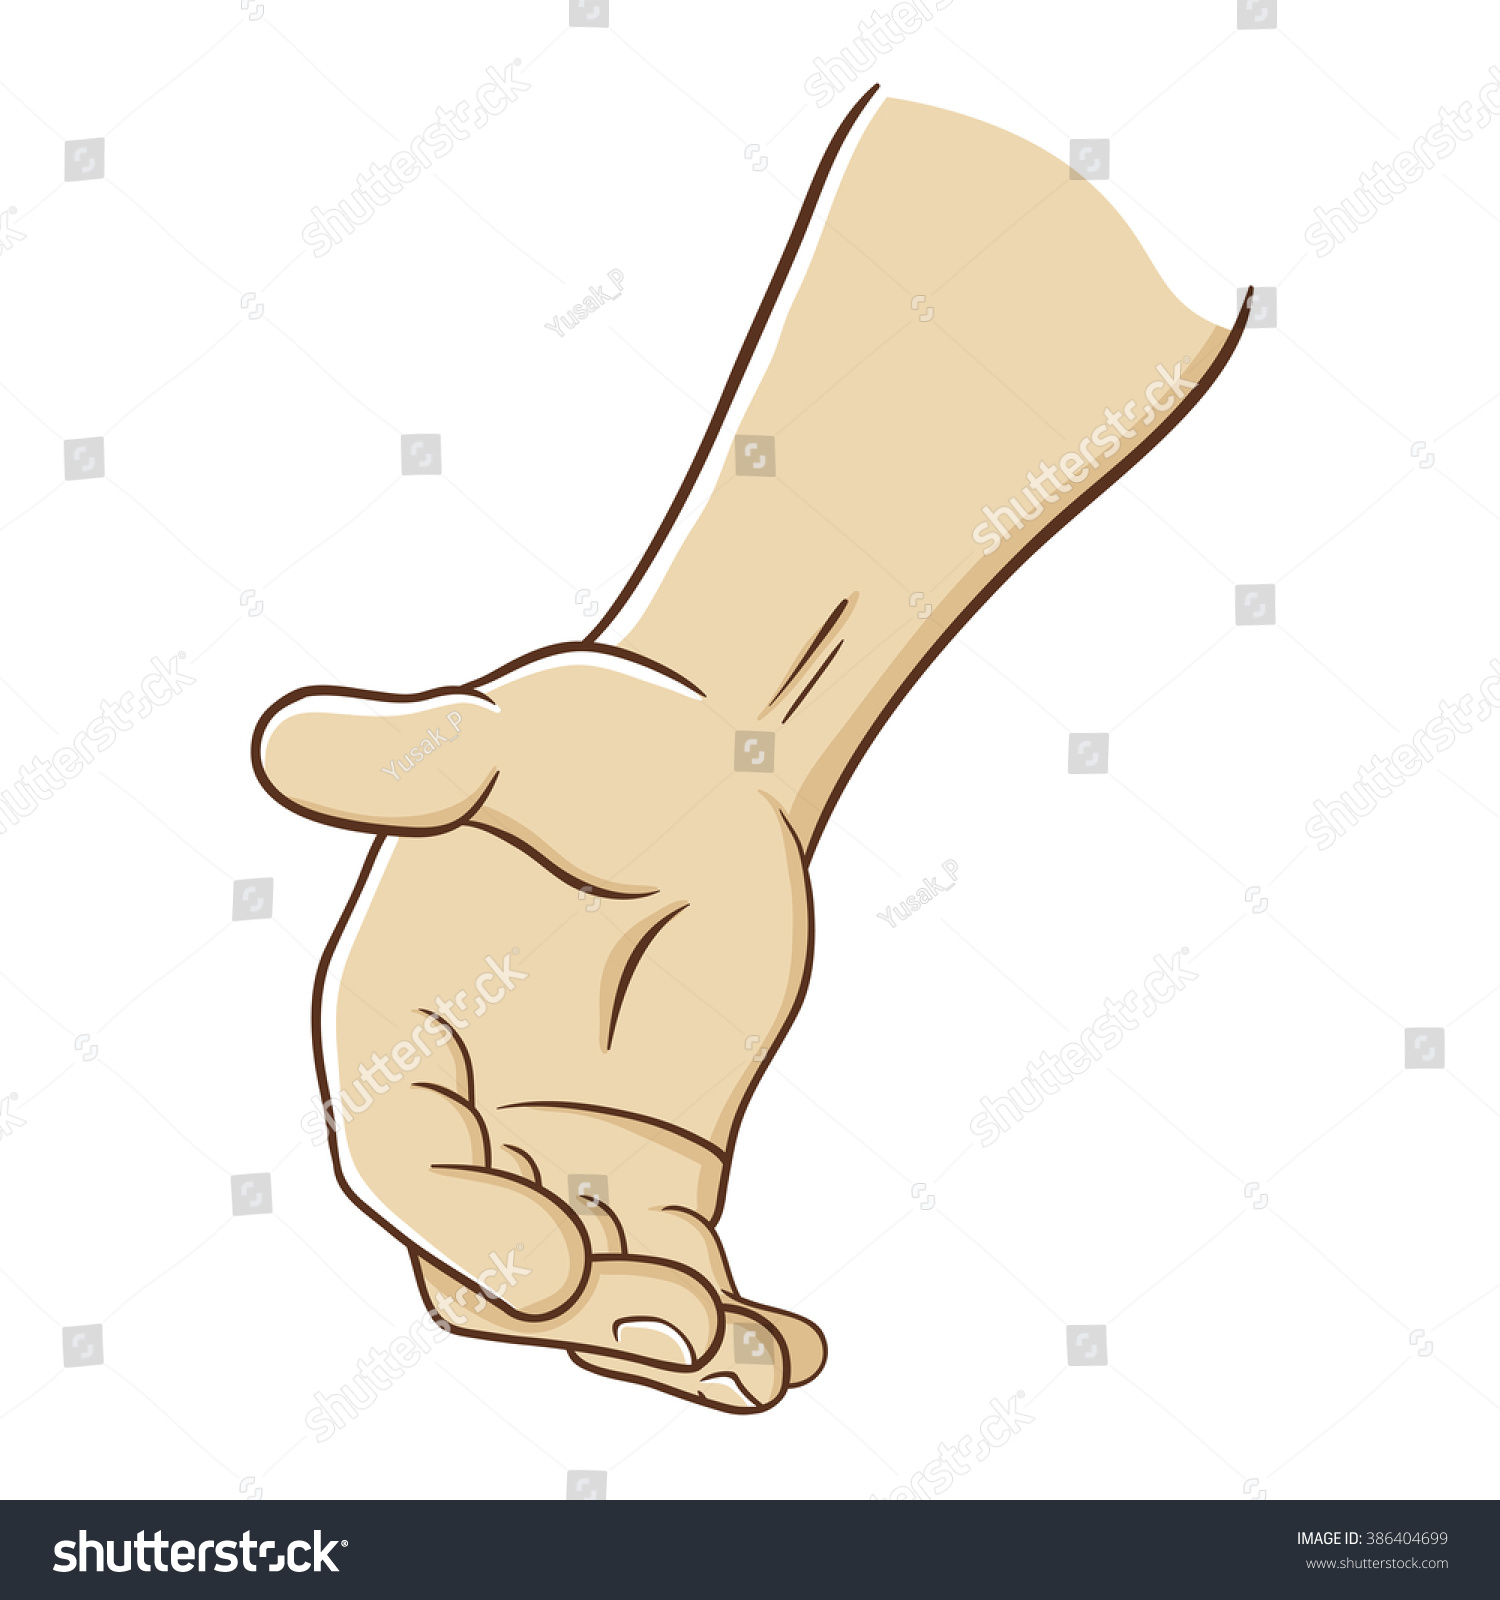 Cartoon Hand Reaching Out Offering Help Stock Vector 386404699